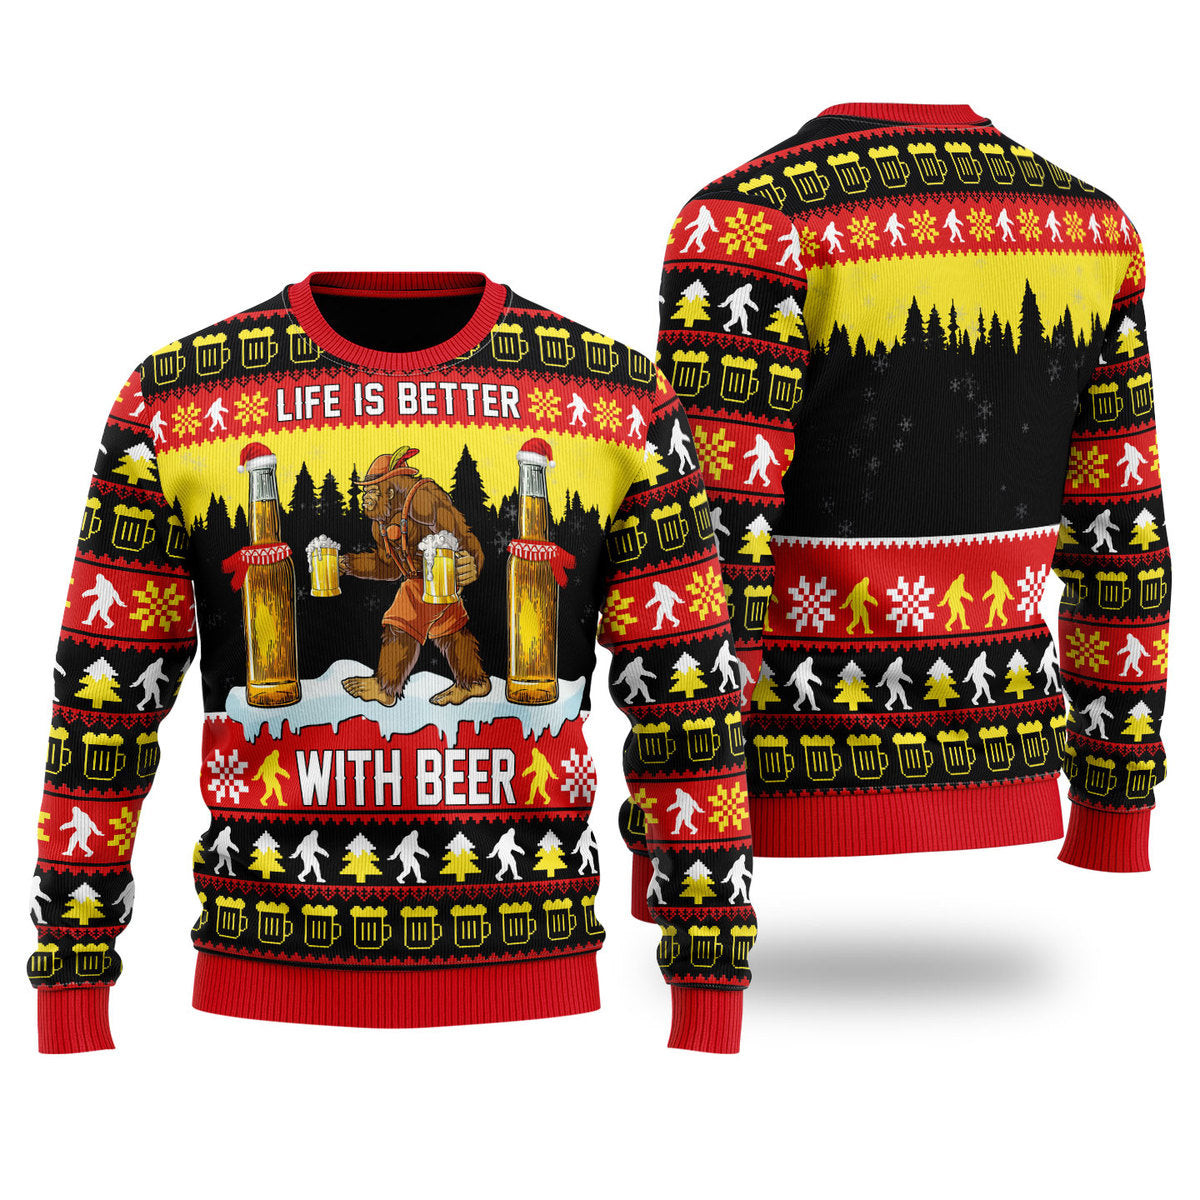 Bigfoot Christmas Is Better With Beer Ugly Christmas Sweater Ugly Sweater For Men Women, Holiday Sweater